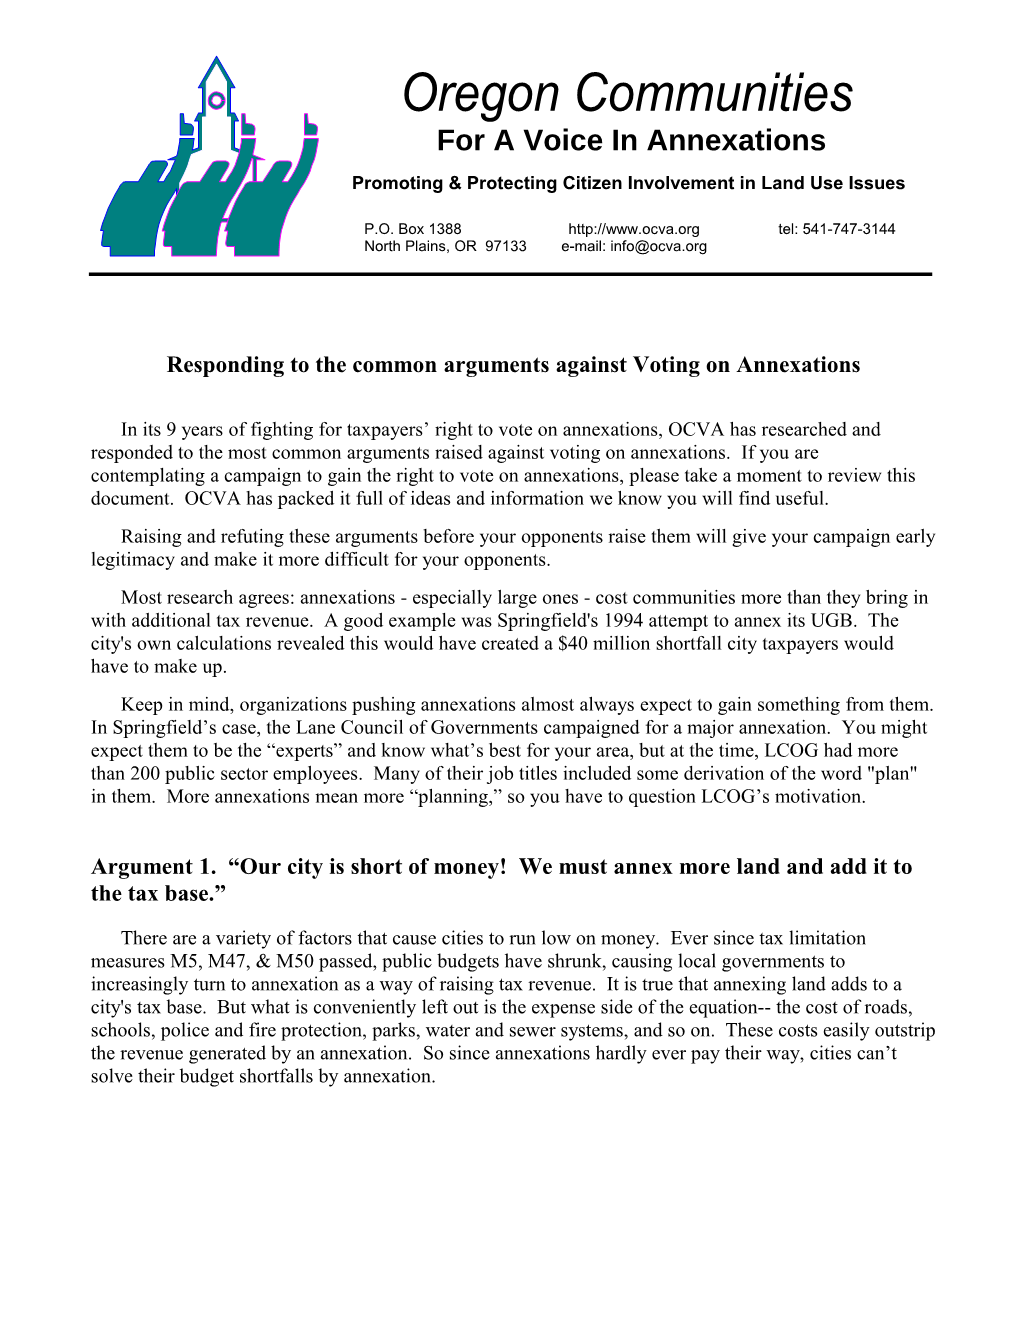 OCVA - Responding to the Common Arguments Against Voting on Annexations